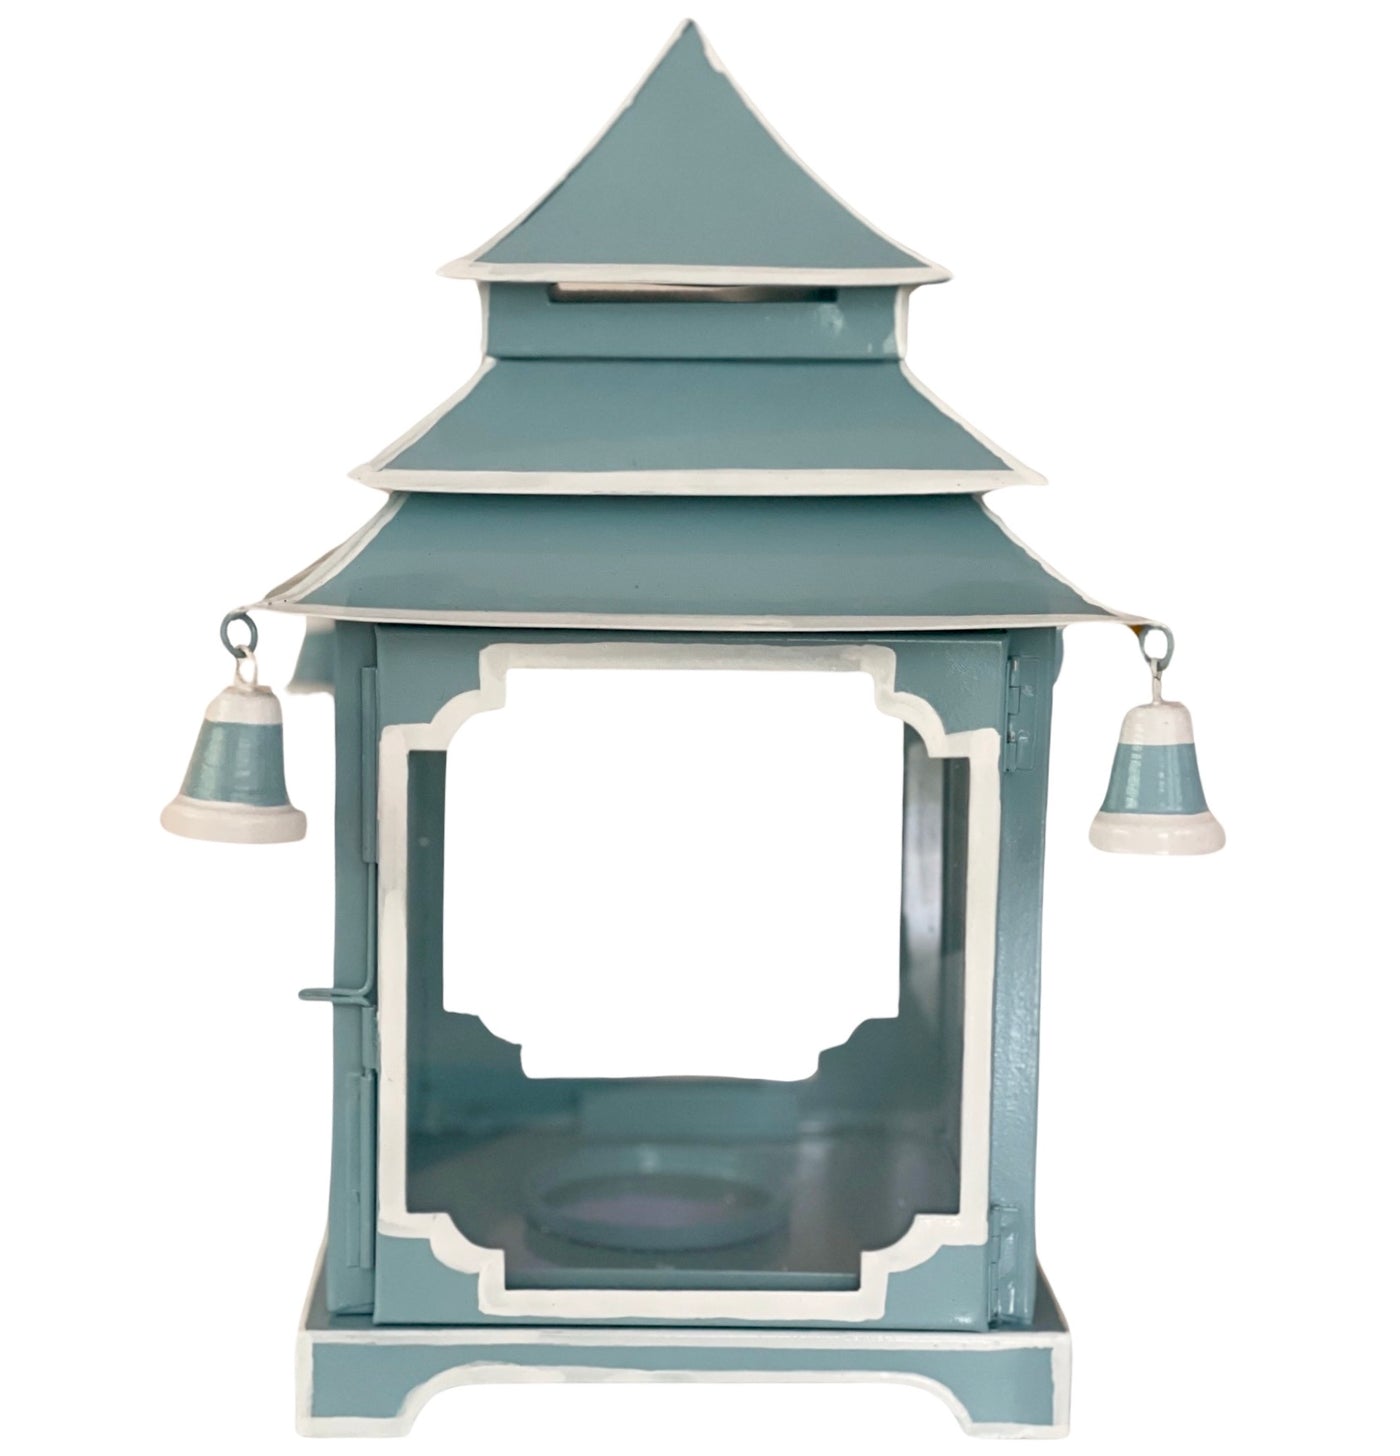 LARGE 31cm Pagoda - Pale Blue with White Trim